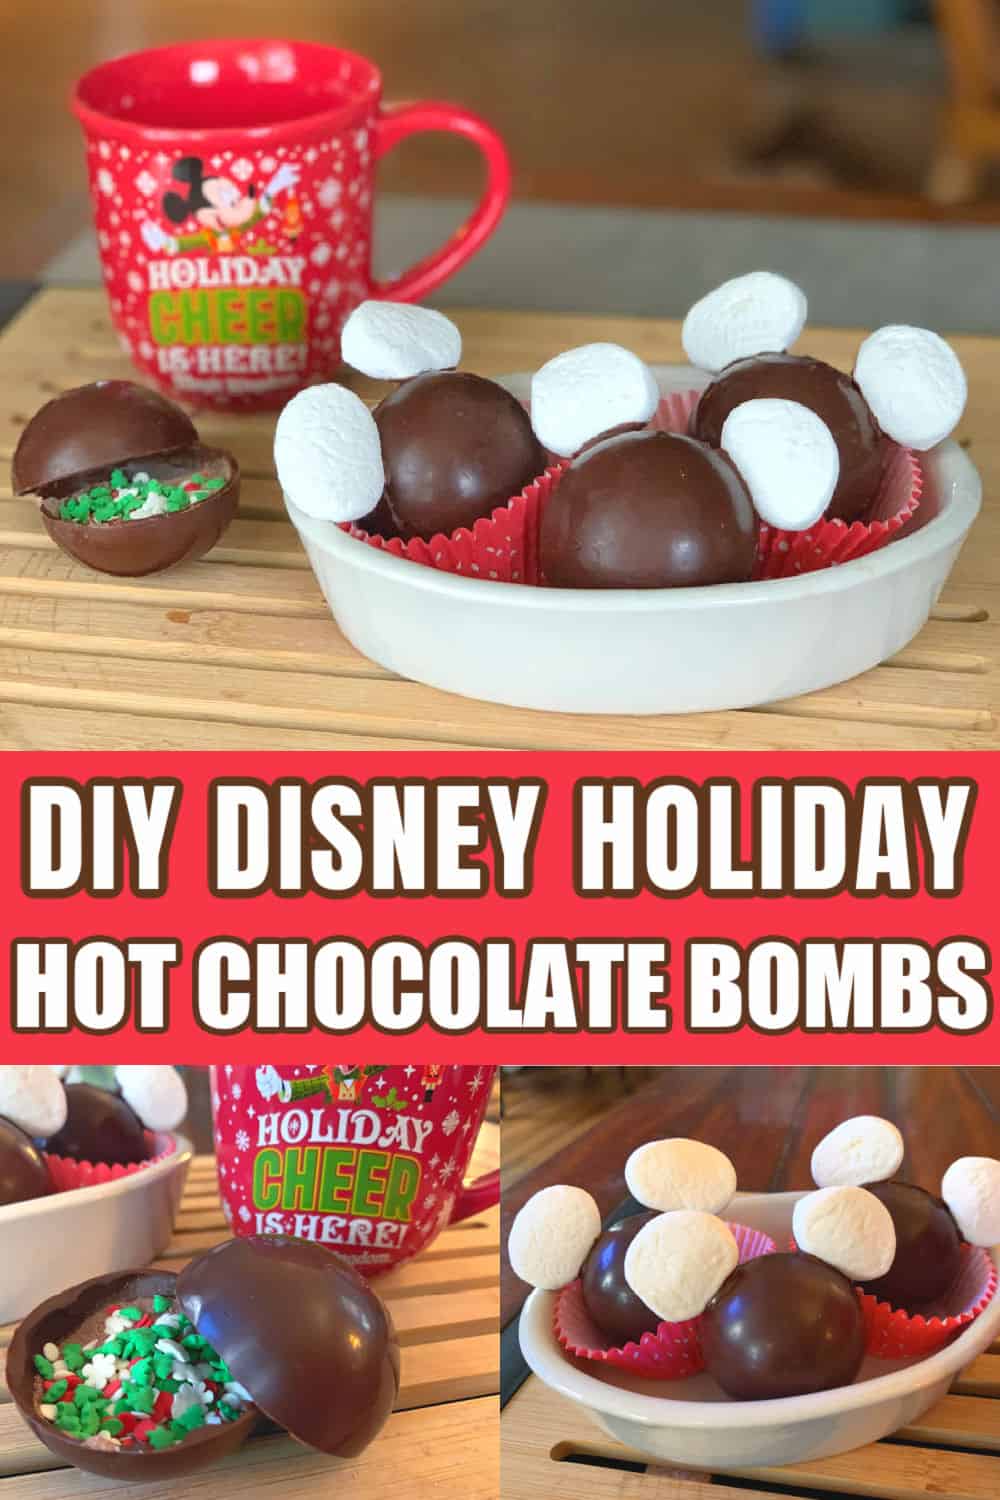 Ready to make some super cute, super adorable Mickey hot chocolate bombs? From ingredients to a step=by=step tutorial, here's my fun recipe! #HotChocolateBombs #Disney #DisneyDIY #DisneyRecipes #HotCocoaBombs